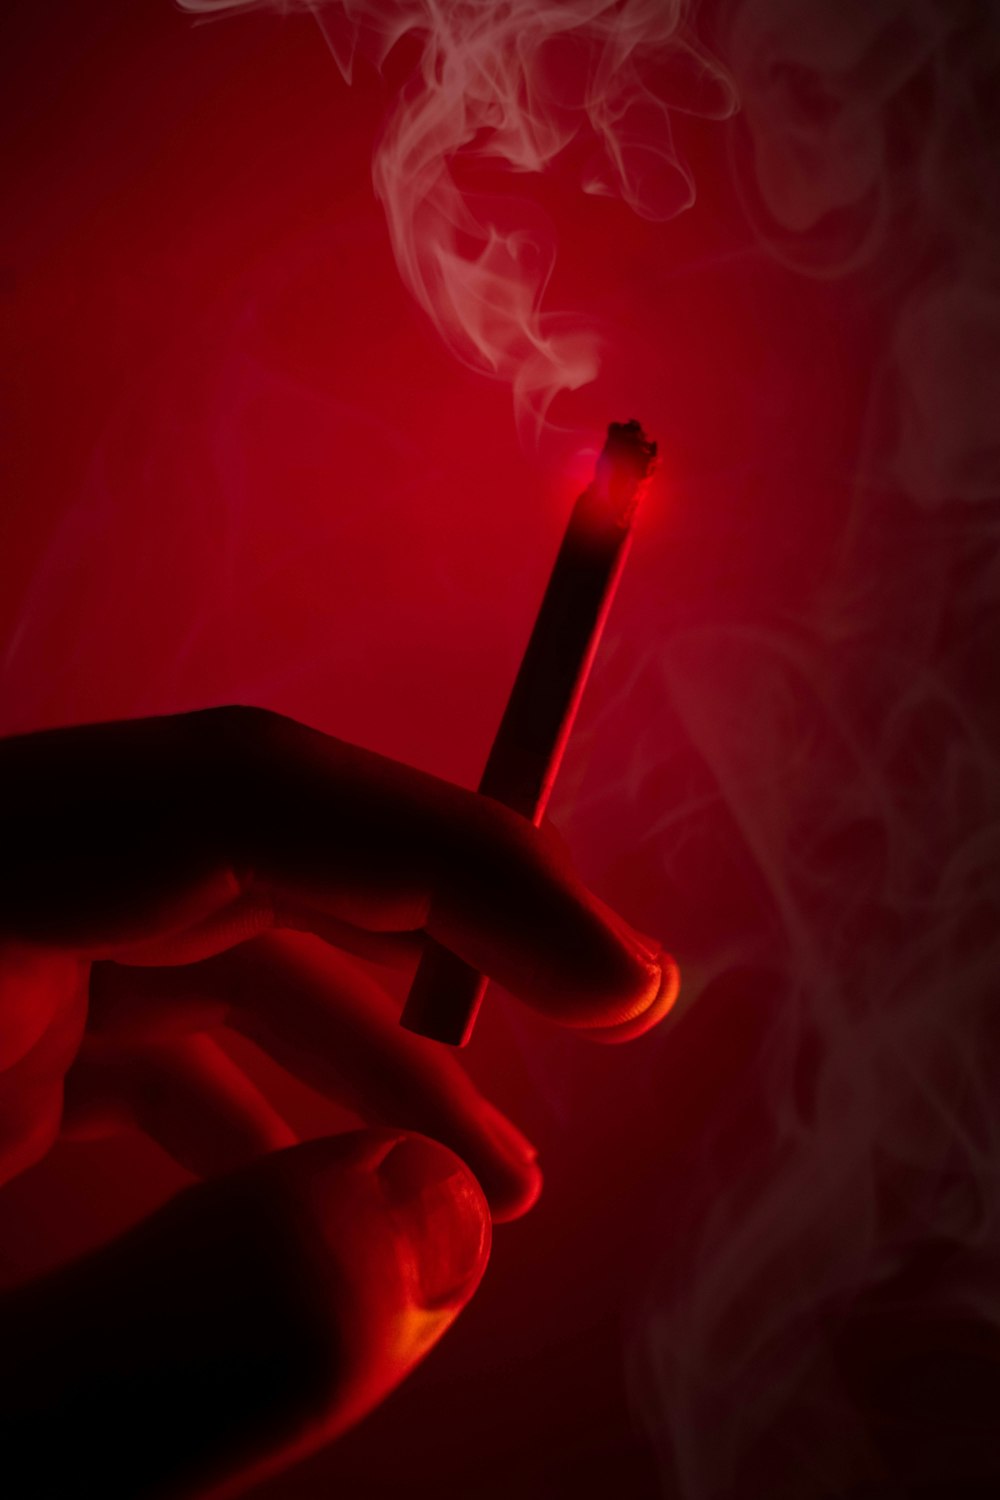 person holding lighted cigarette stick